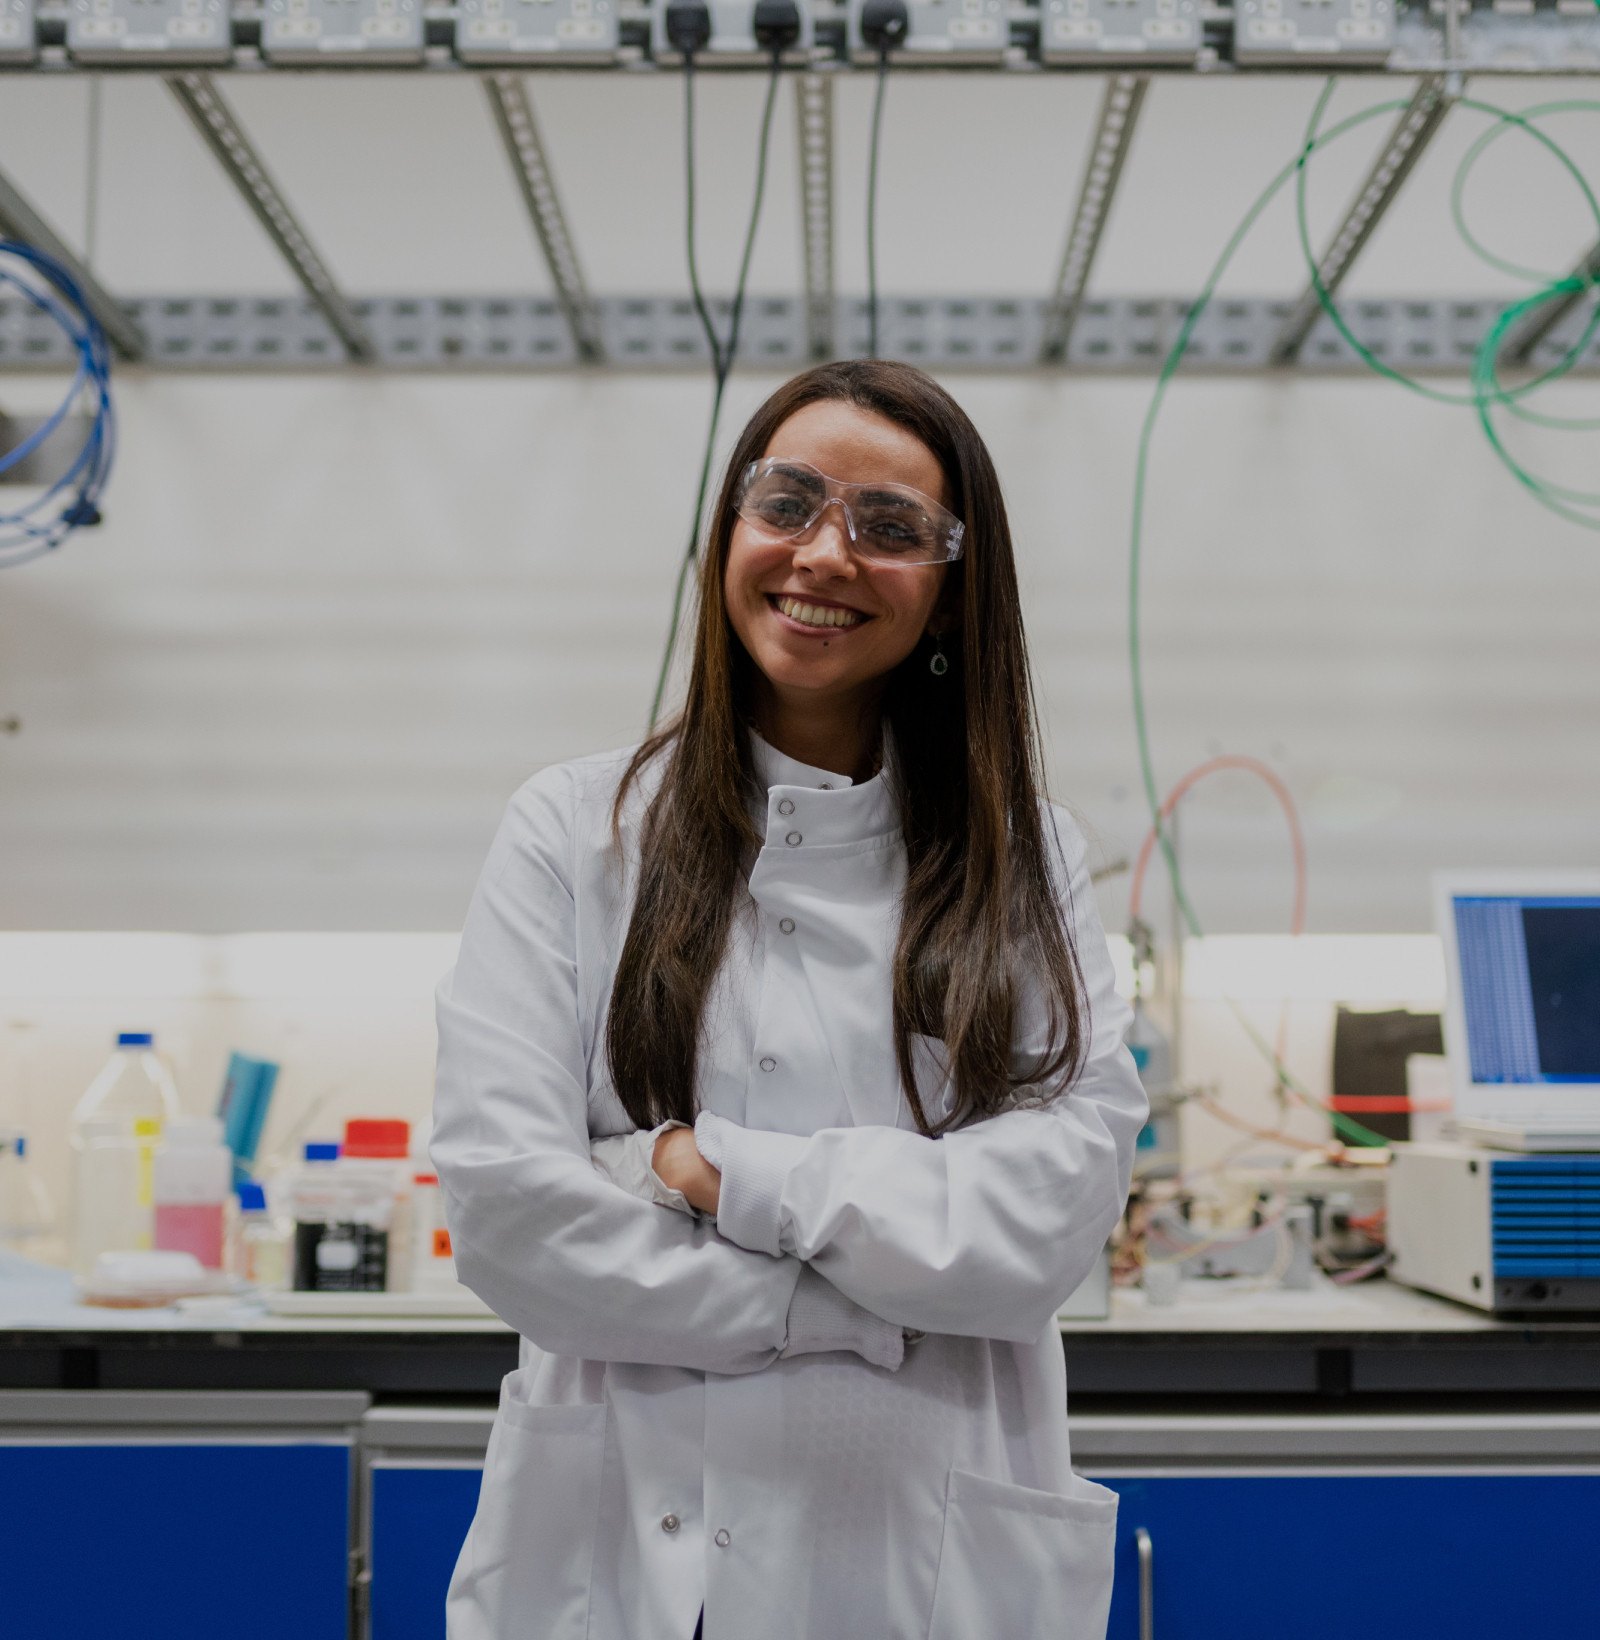 Woman standing in a science lab, smiling and facing the camera